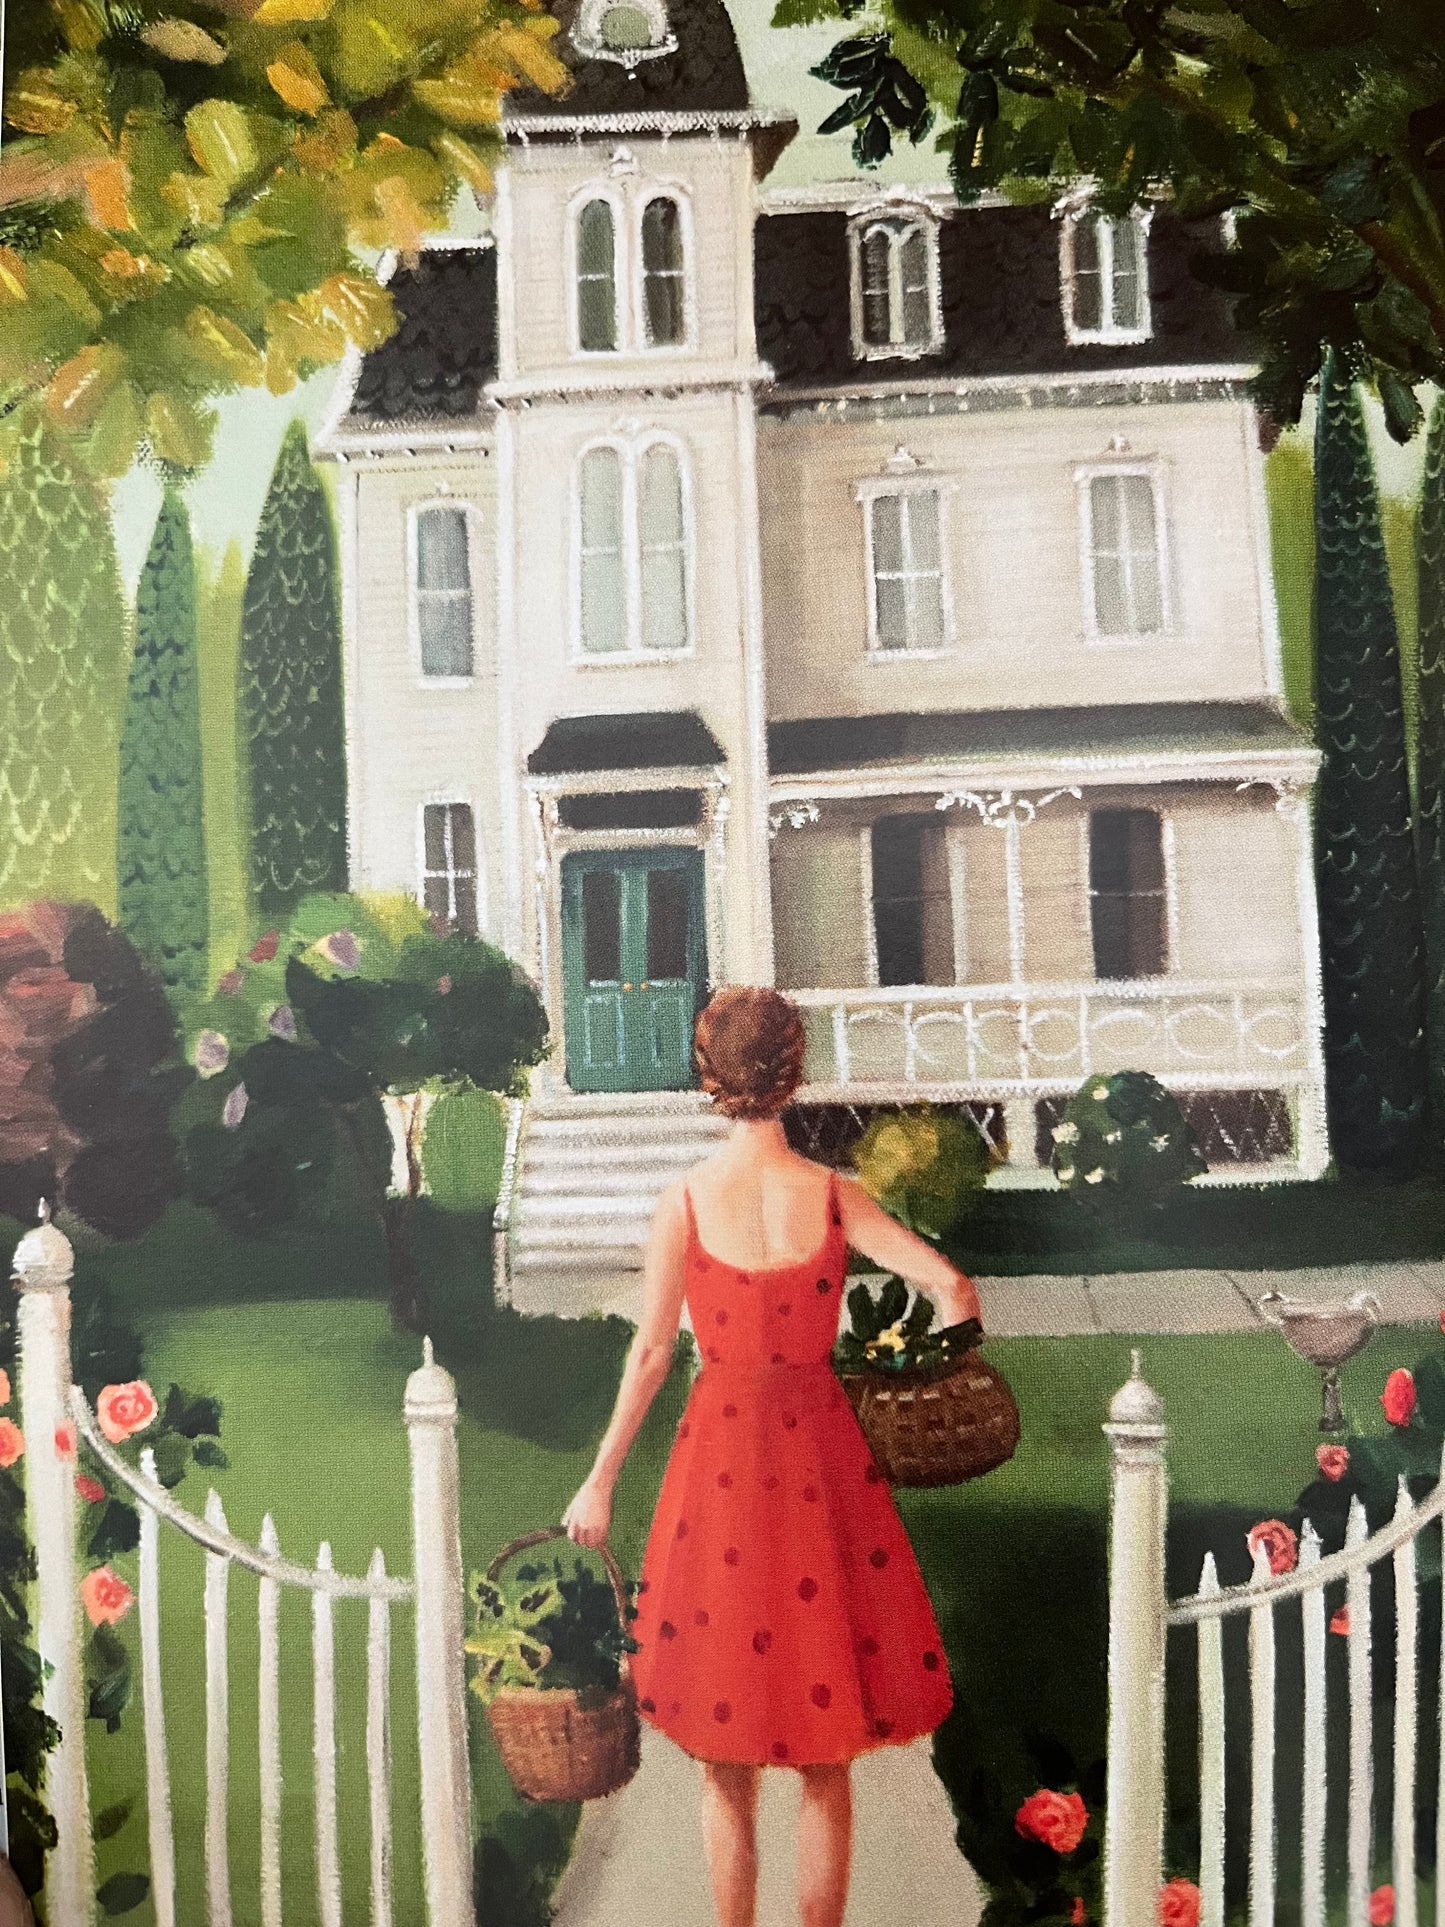 Chapter Books for Older Readers - LUCY CRISP AND THE VANISHING HOUSE